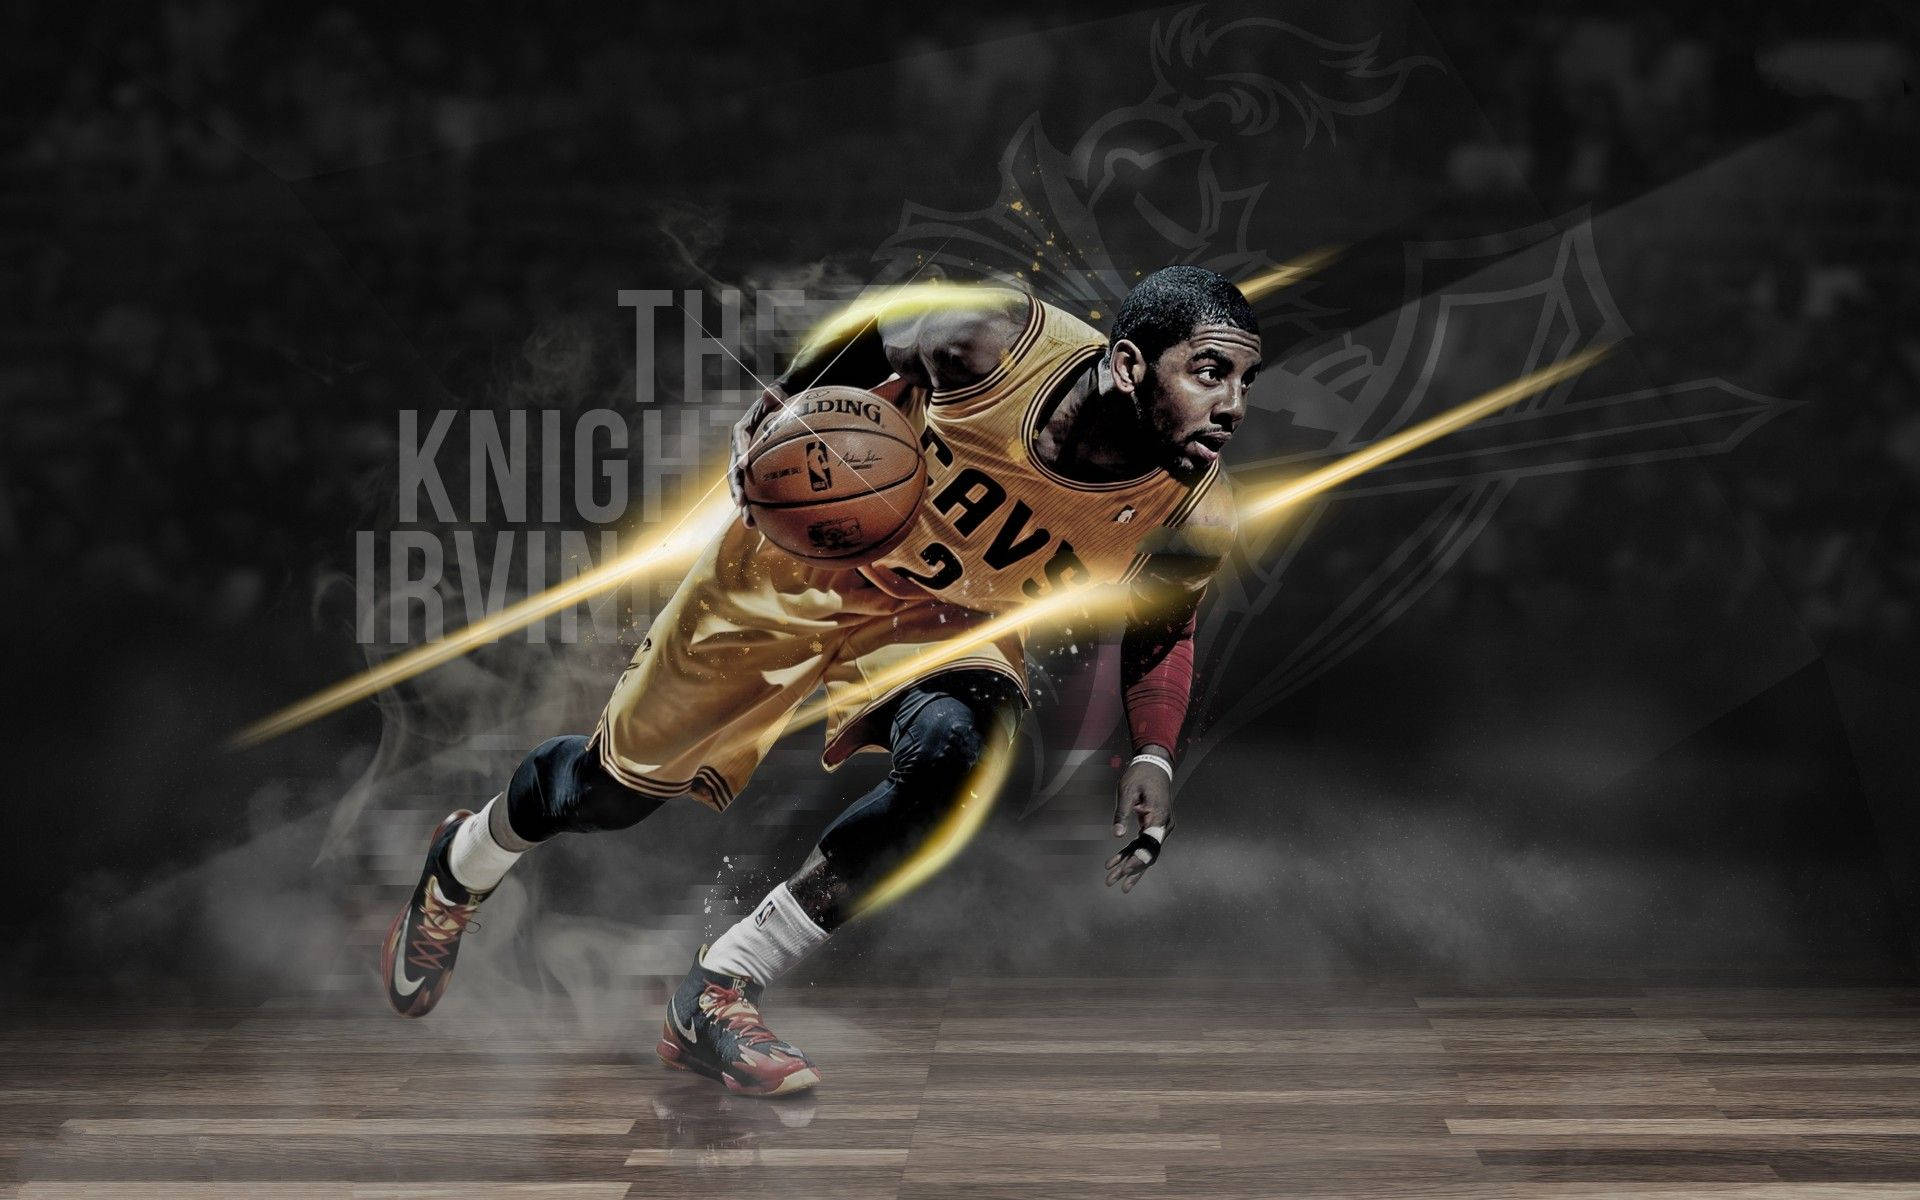 The Knight Kyrie Irving Background